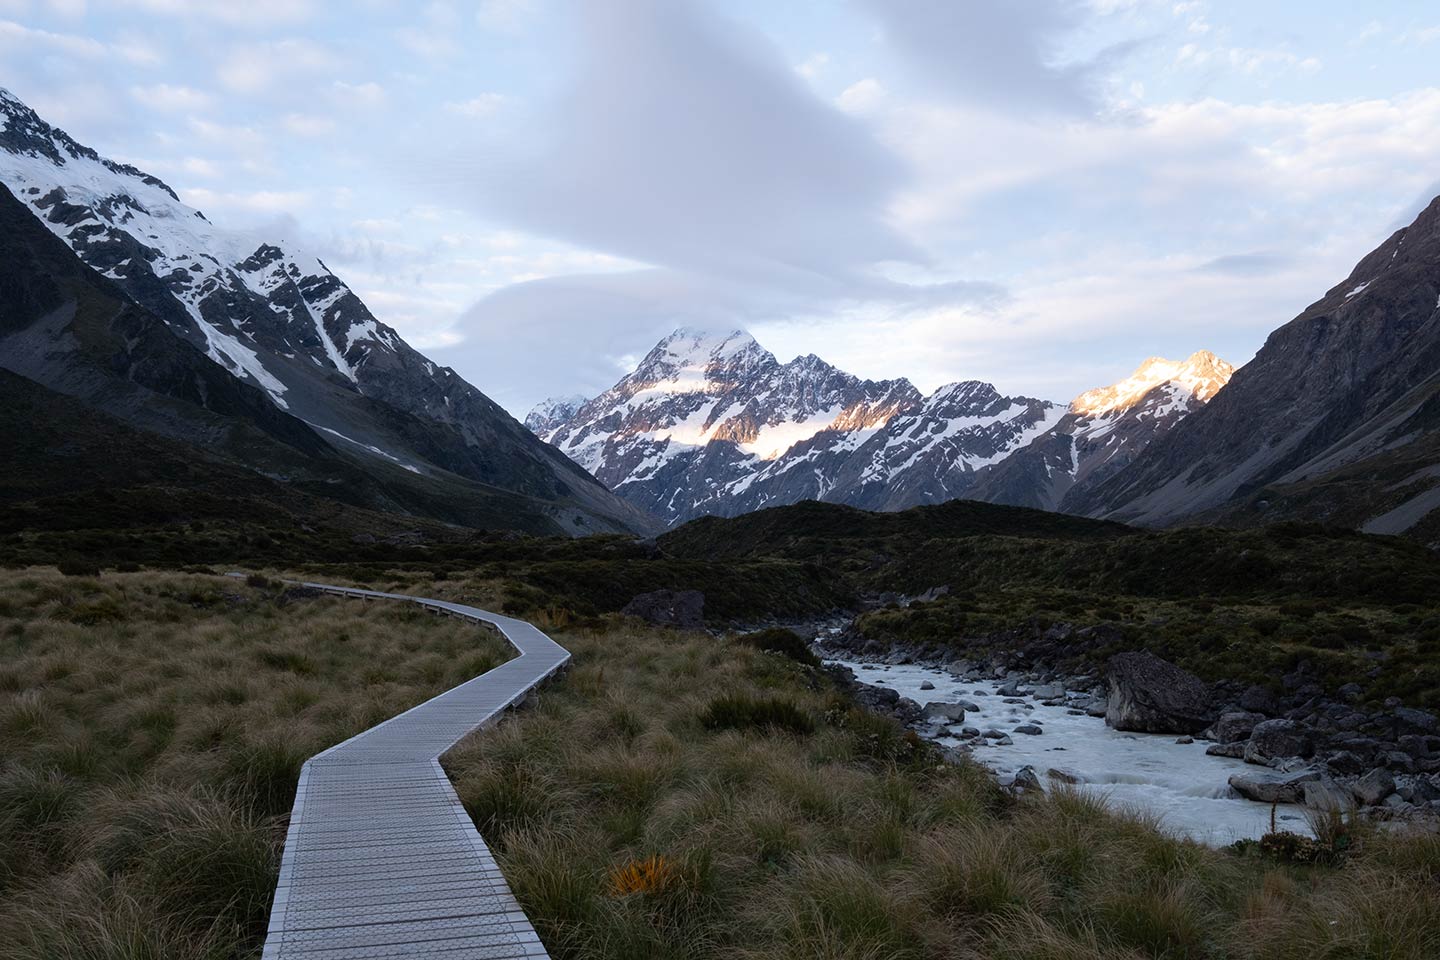 A wooden path leads towards Aoraki/Mount Cook with moody clouds above. This is the RAW unedited image without a preset applied.